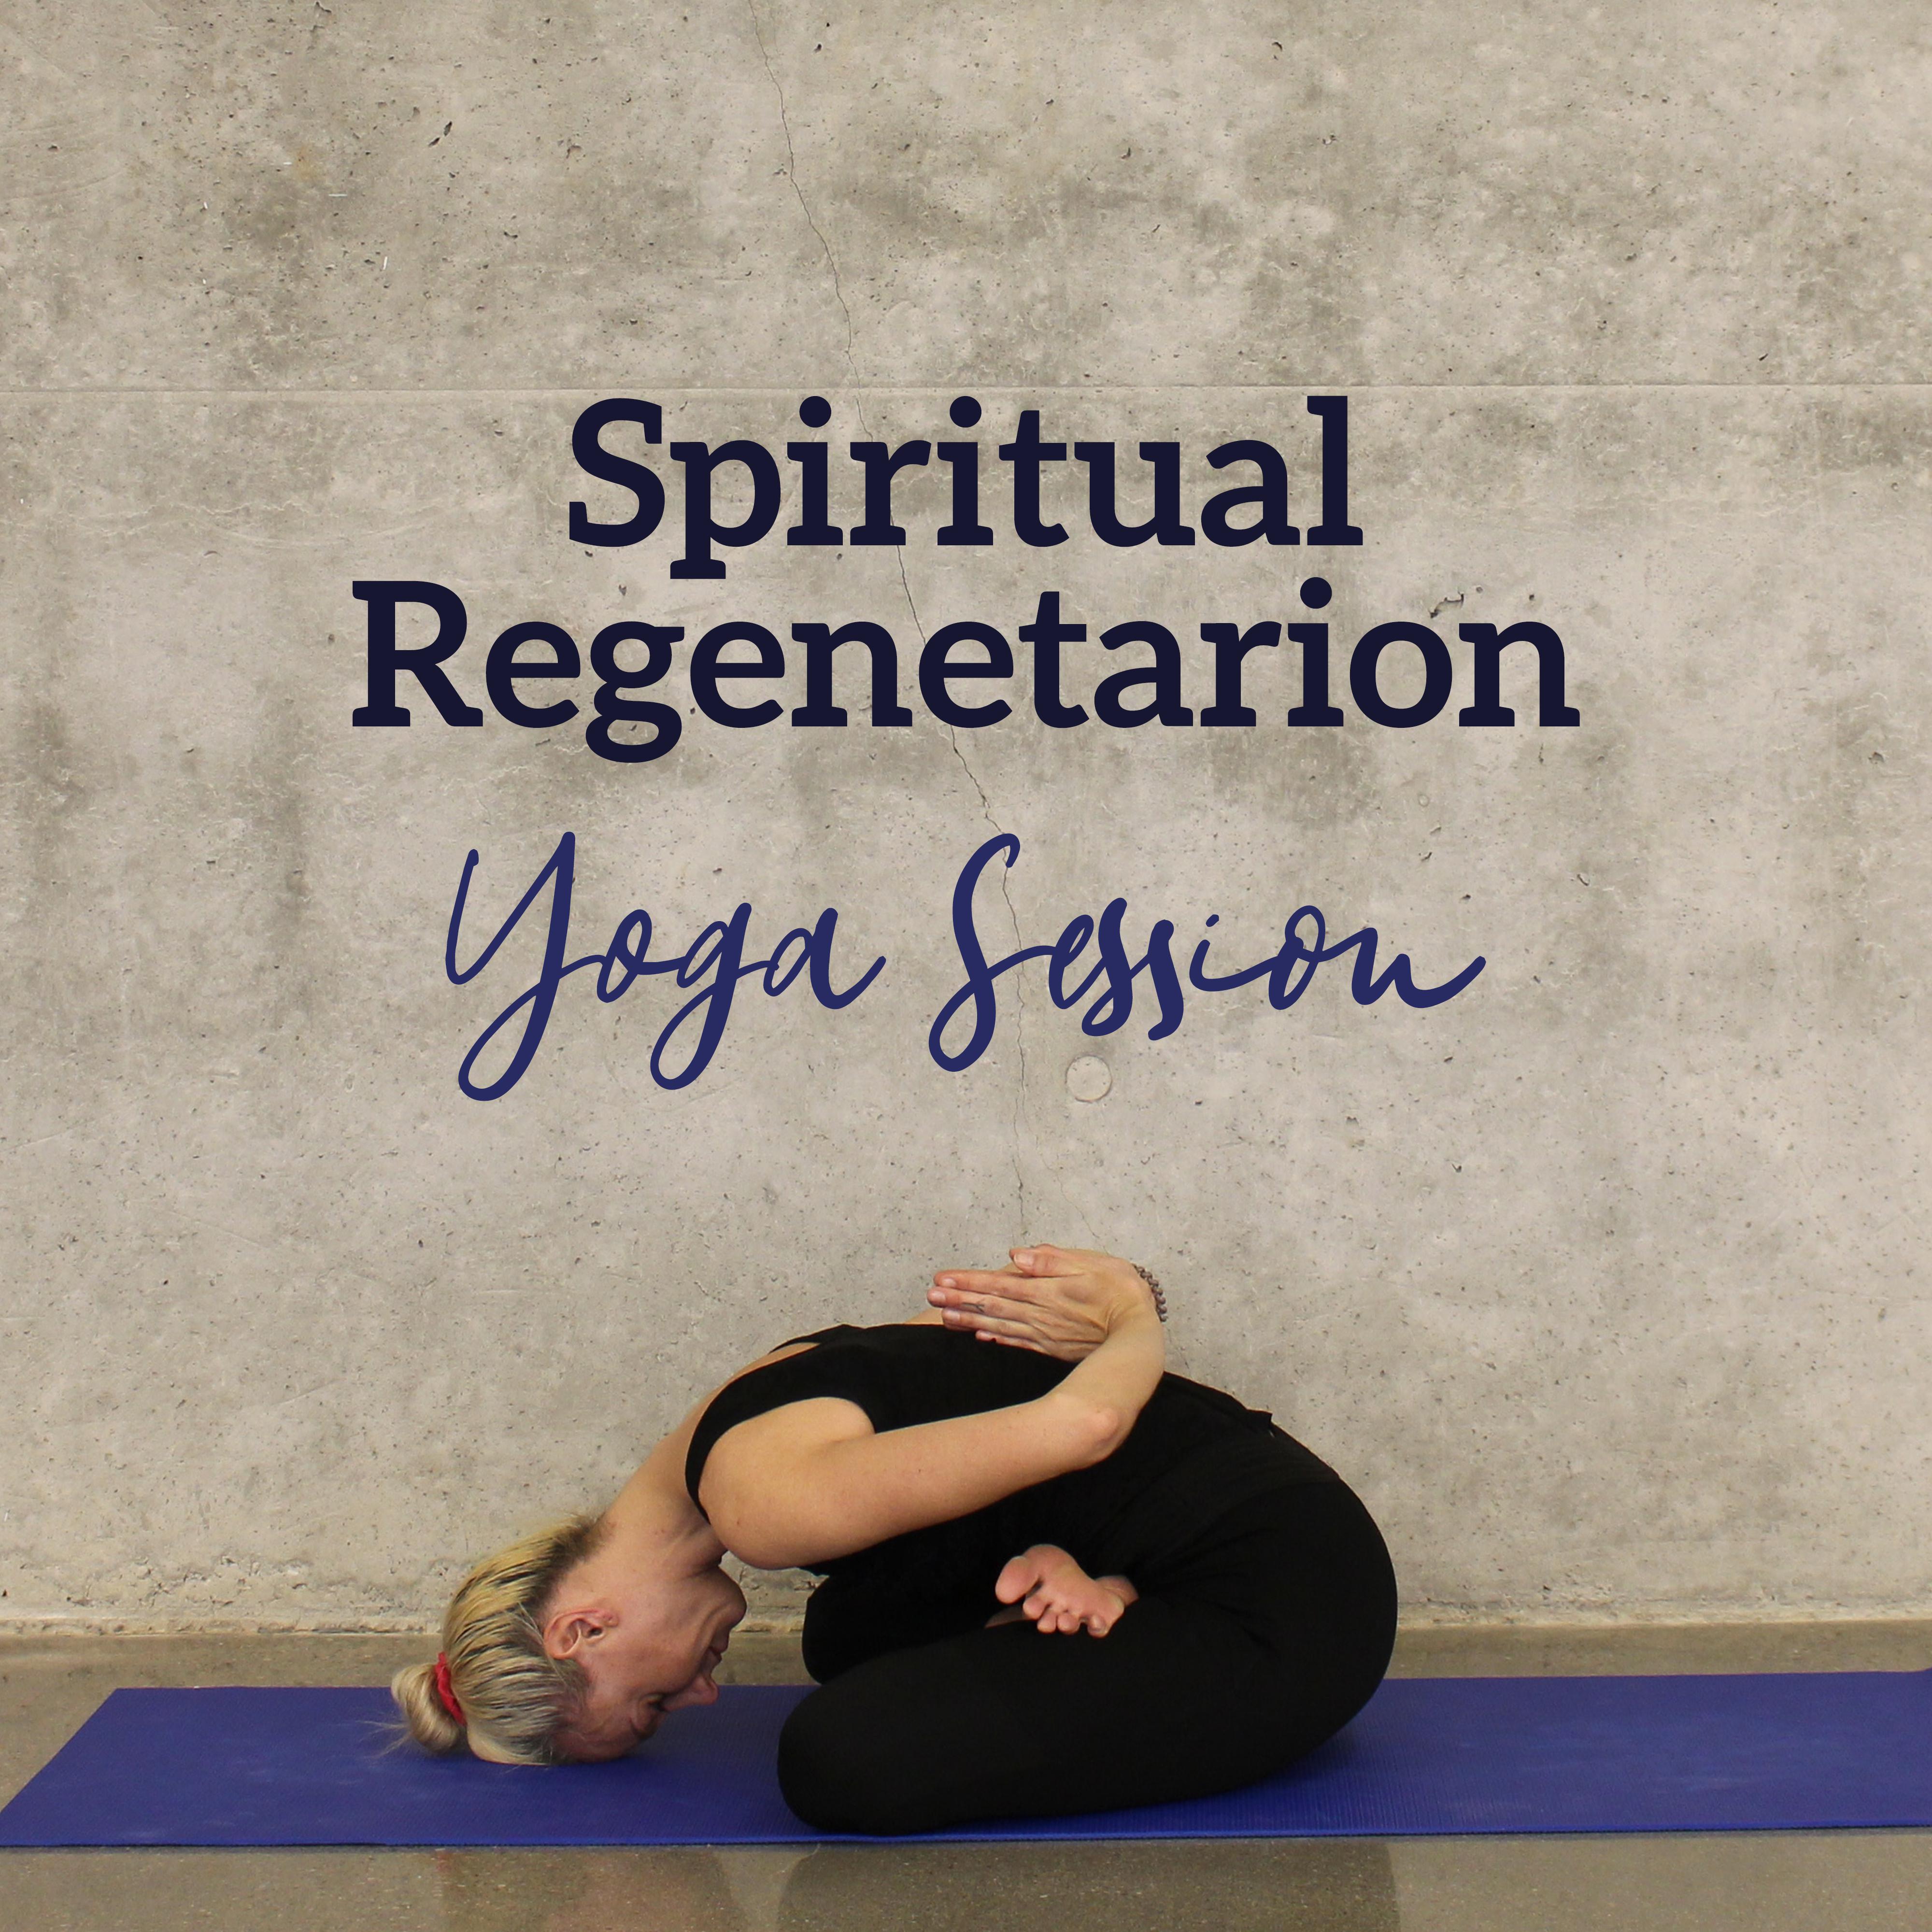 Spiritual Regenetarion Yoga Session: 2019 New Age Melodies for Deep Meditation & Relaxation